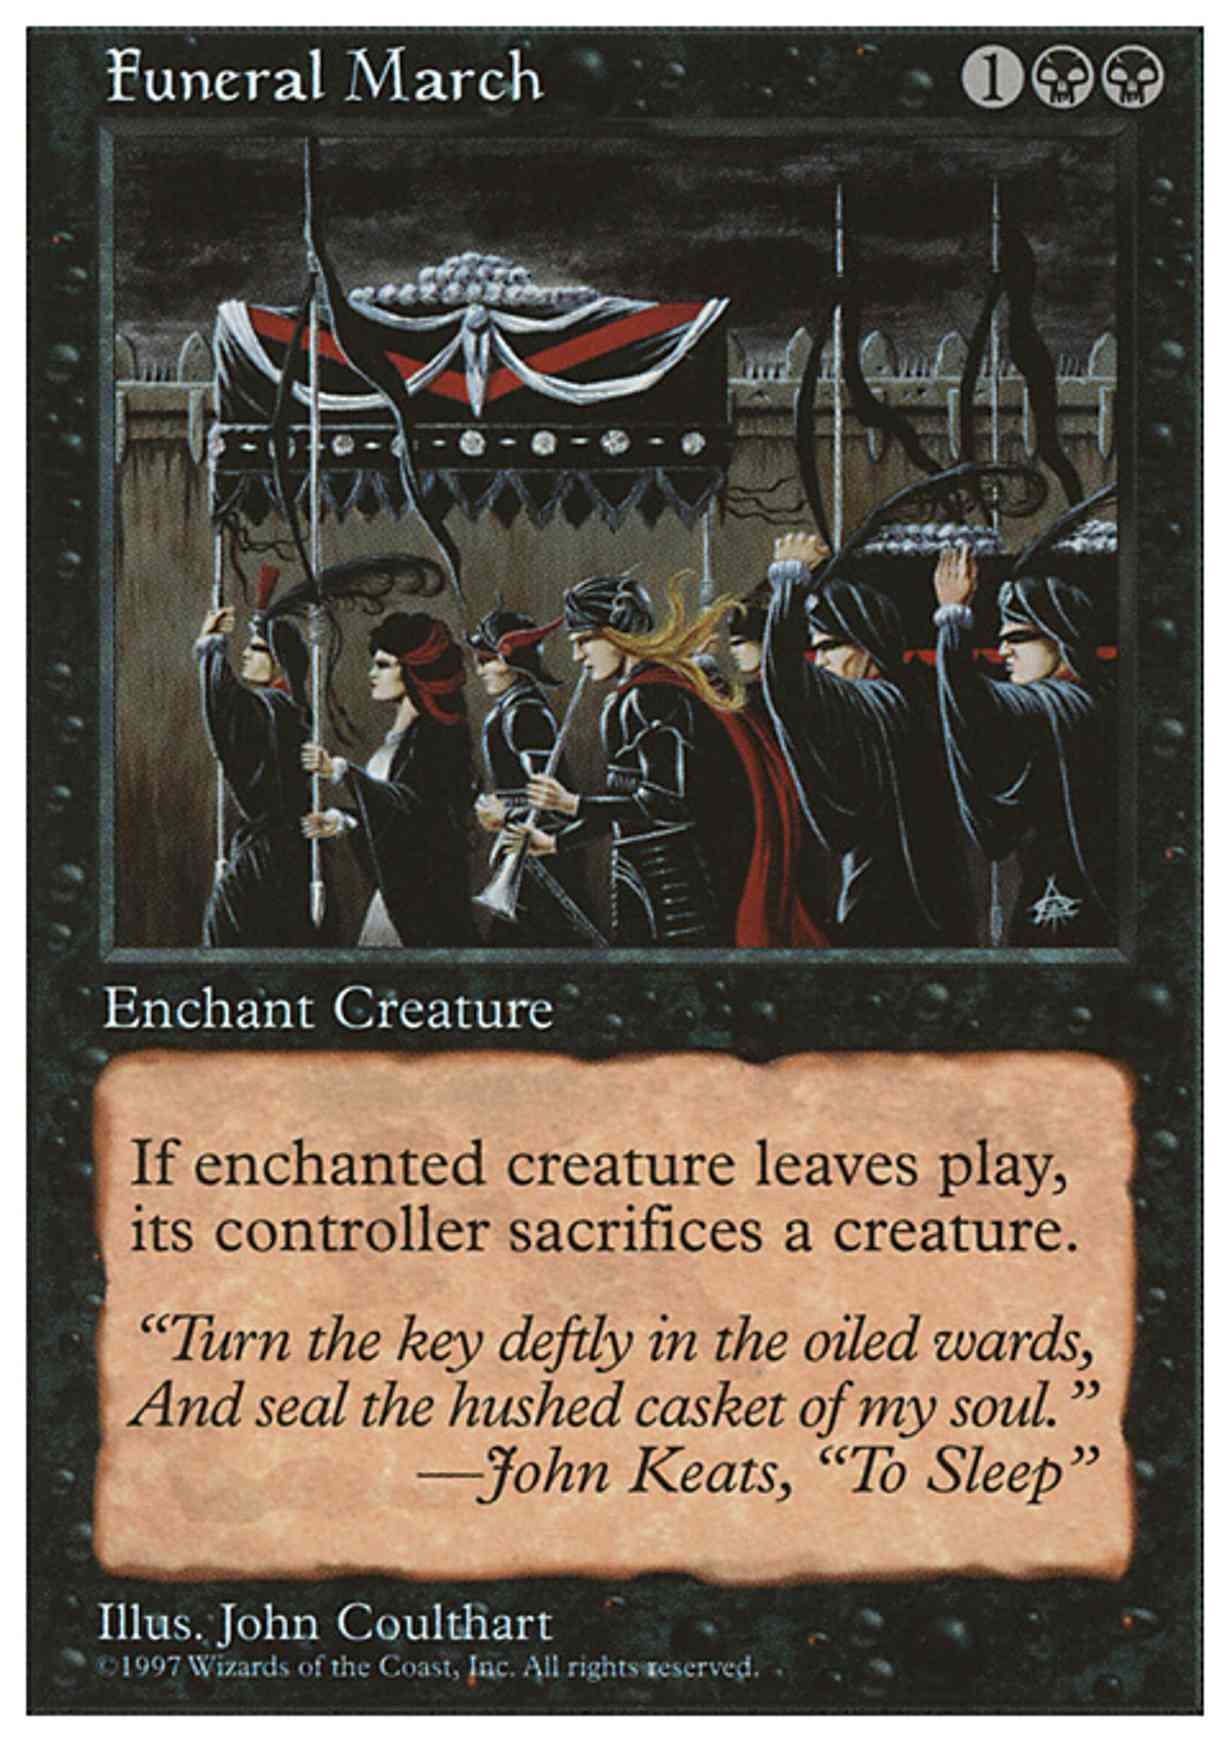 Funeral March magic card front